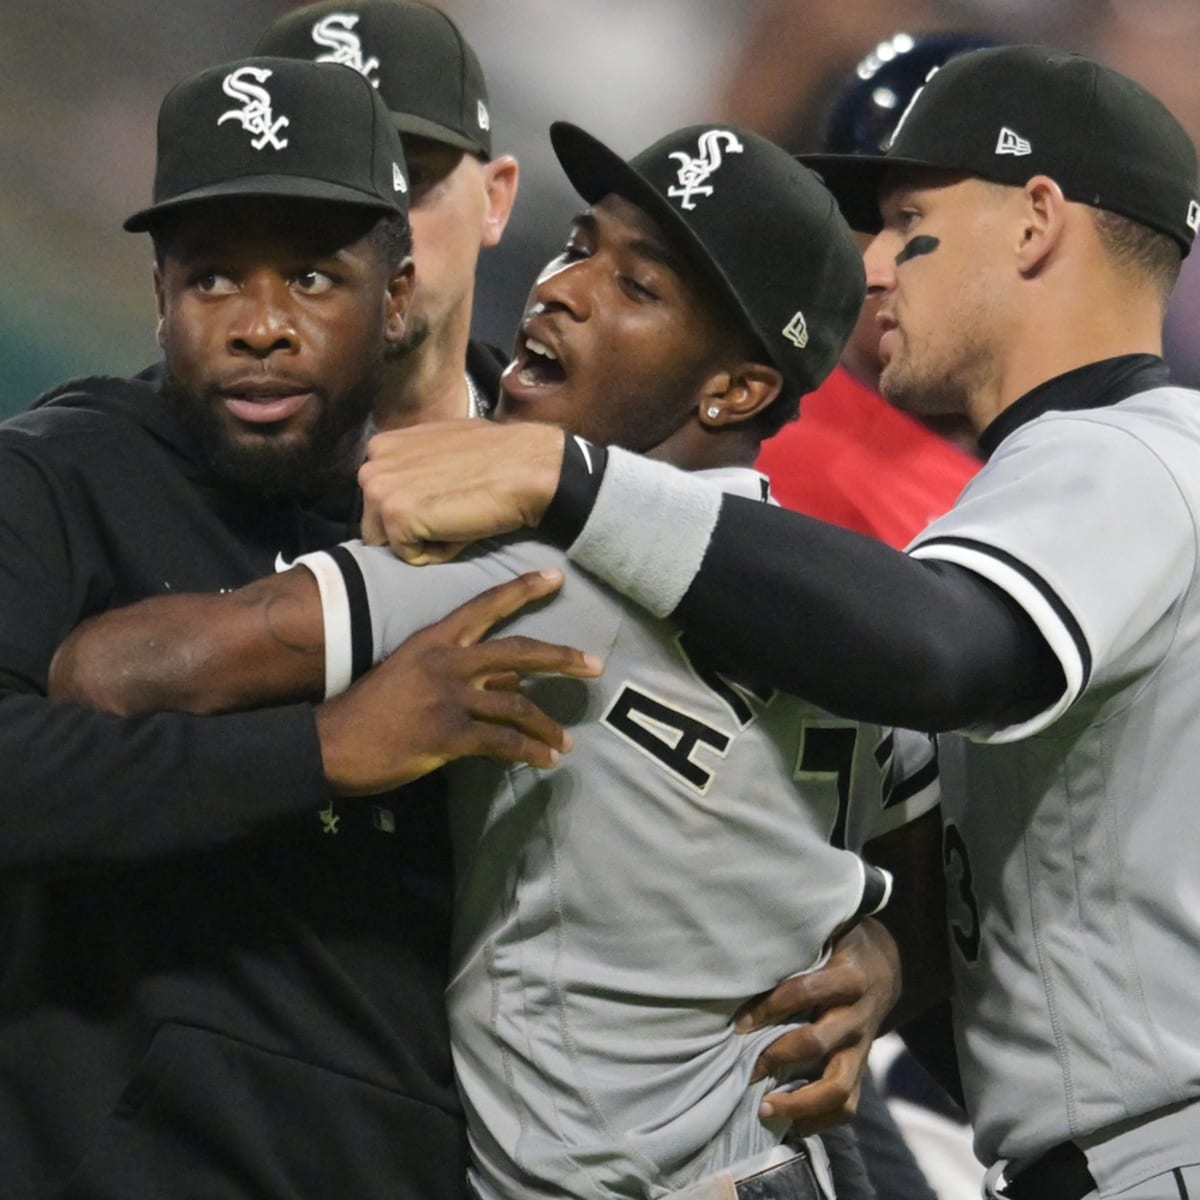 The Chicago White Sox: 'No rules' and no culture